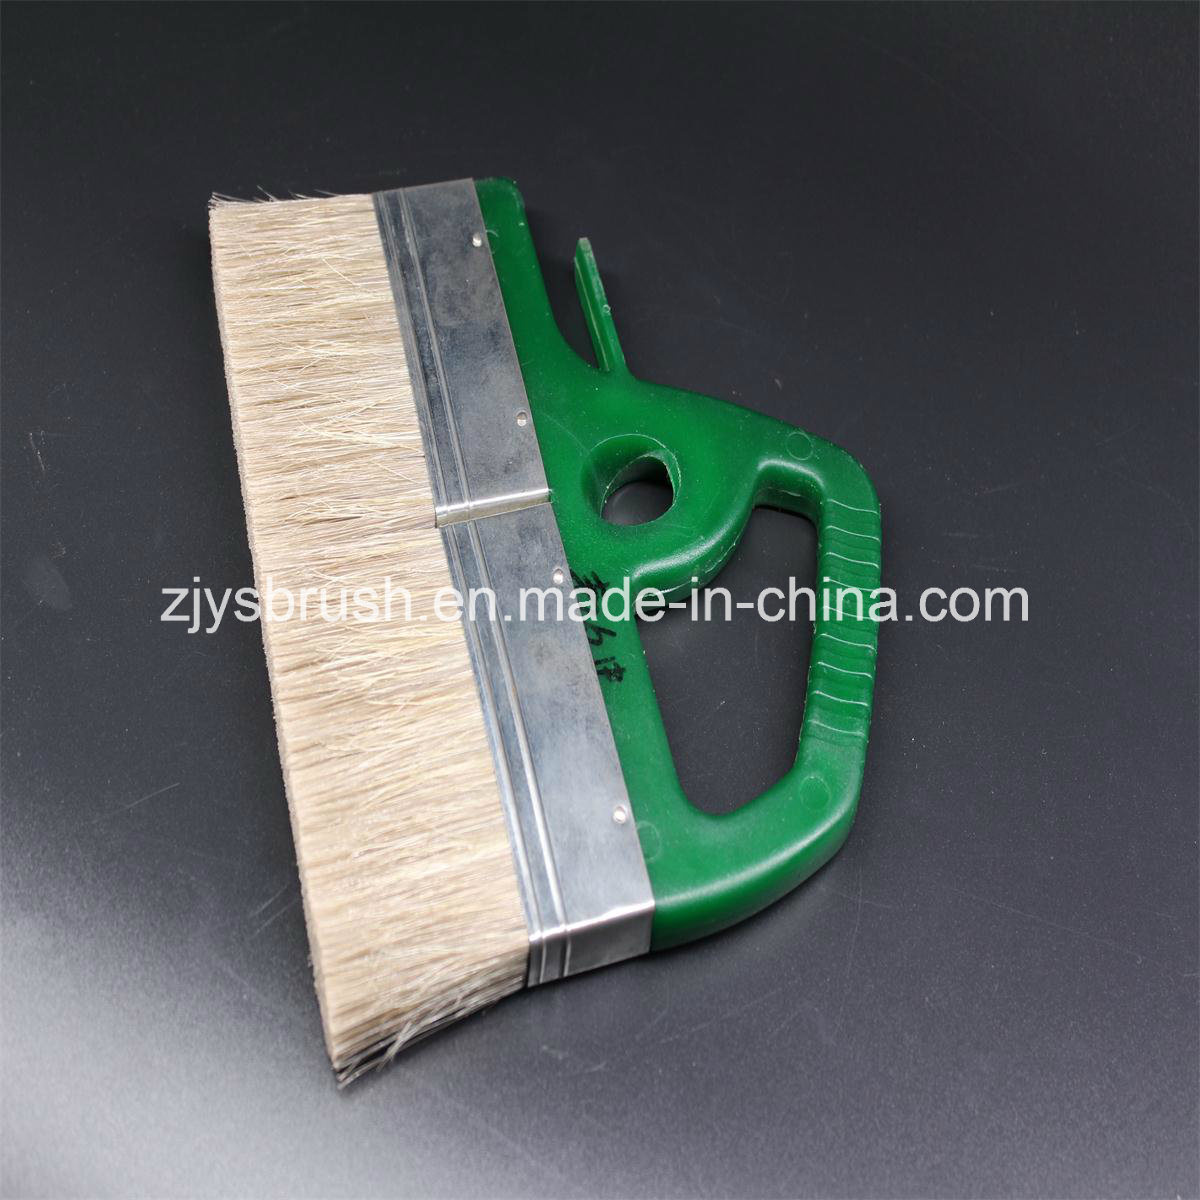 Paint Brush with Shape Plastic Handle for Decoration Function